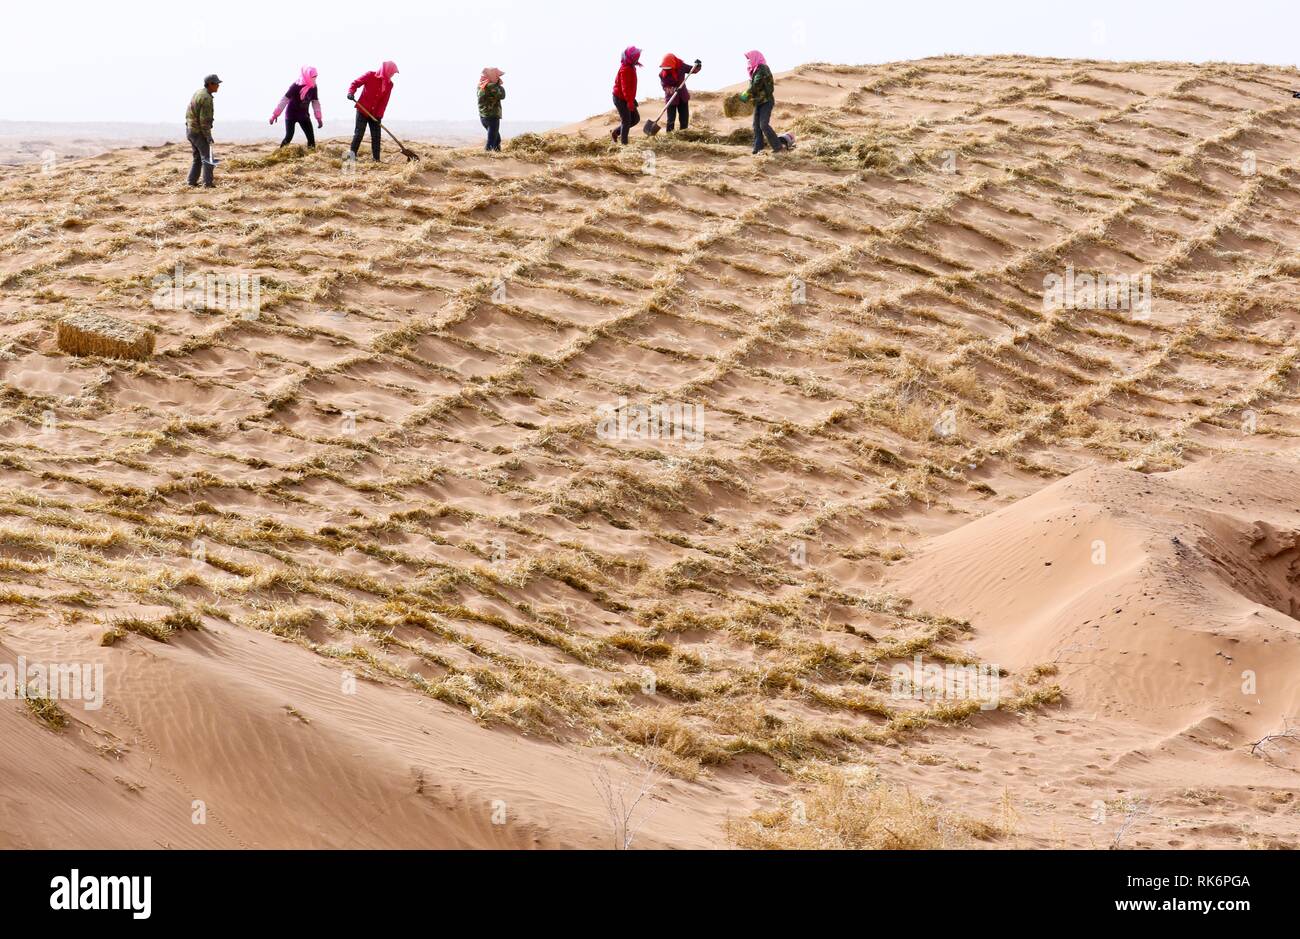 Beijing, China. 10th Feb 2019. Anti-desertification volunteers strengthen a straw checkerboard sand barrier in Linze County of Zhangye, northwest China's Gansu Province, March 27, 2018. More than 100 million Chinese have registered as volunteers by the end of 2018, according to the Ministry of Civil Affairs. There have been about 12,000 organizations of volunteer services registered by the end of 2018, which provided more than 1.2 billion hours of service in total. Stock Photo